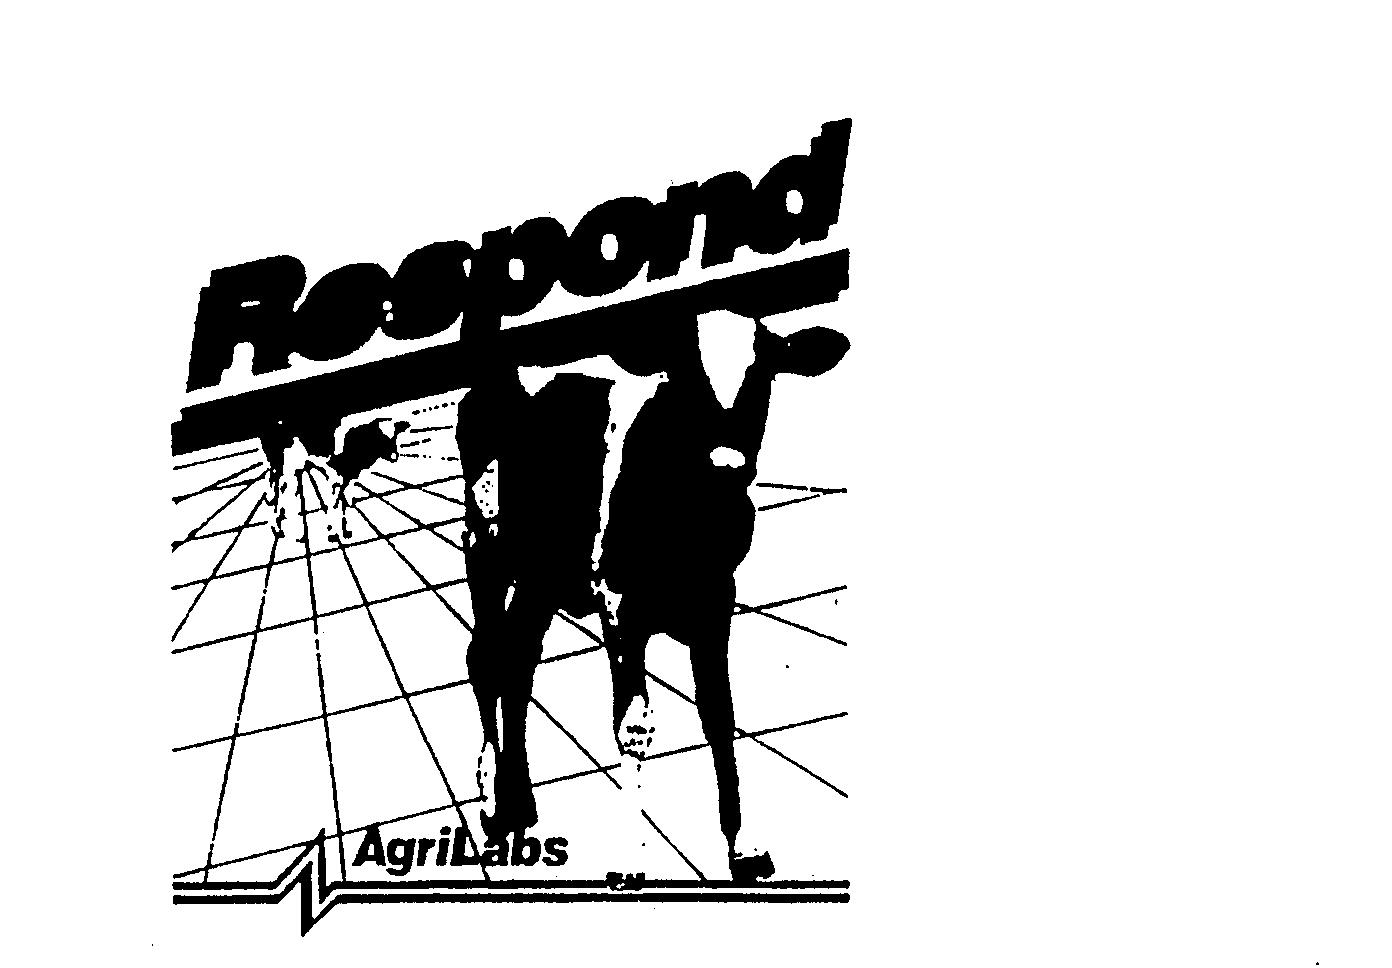  RESPOND AGRILABS